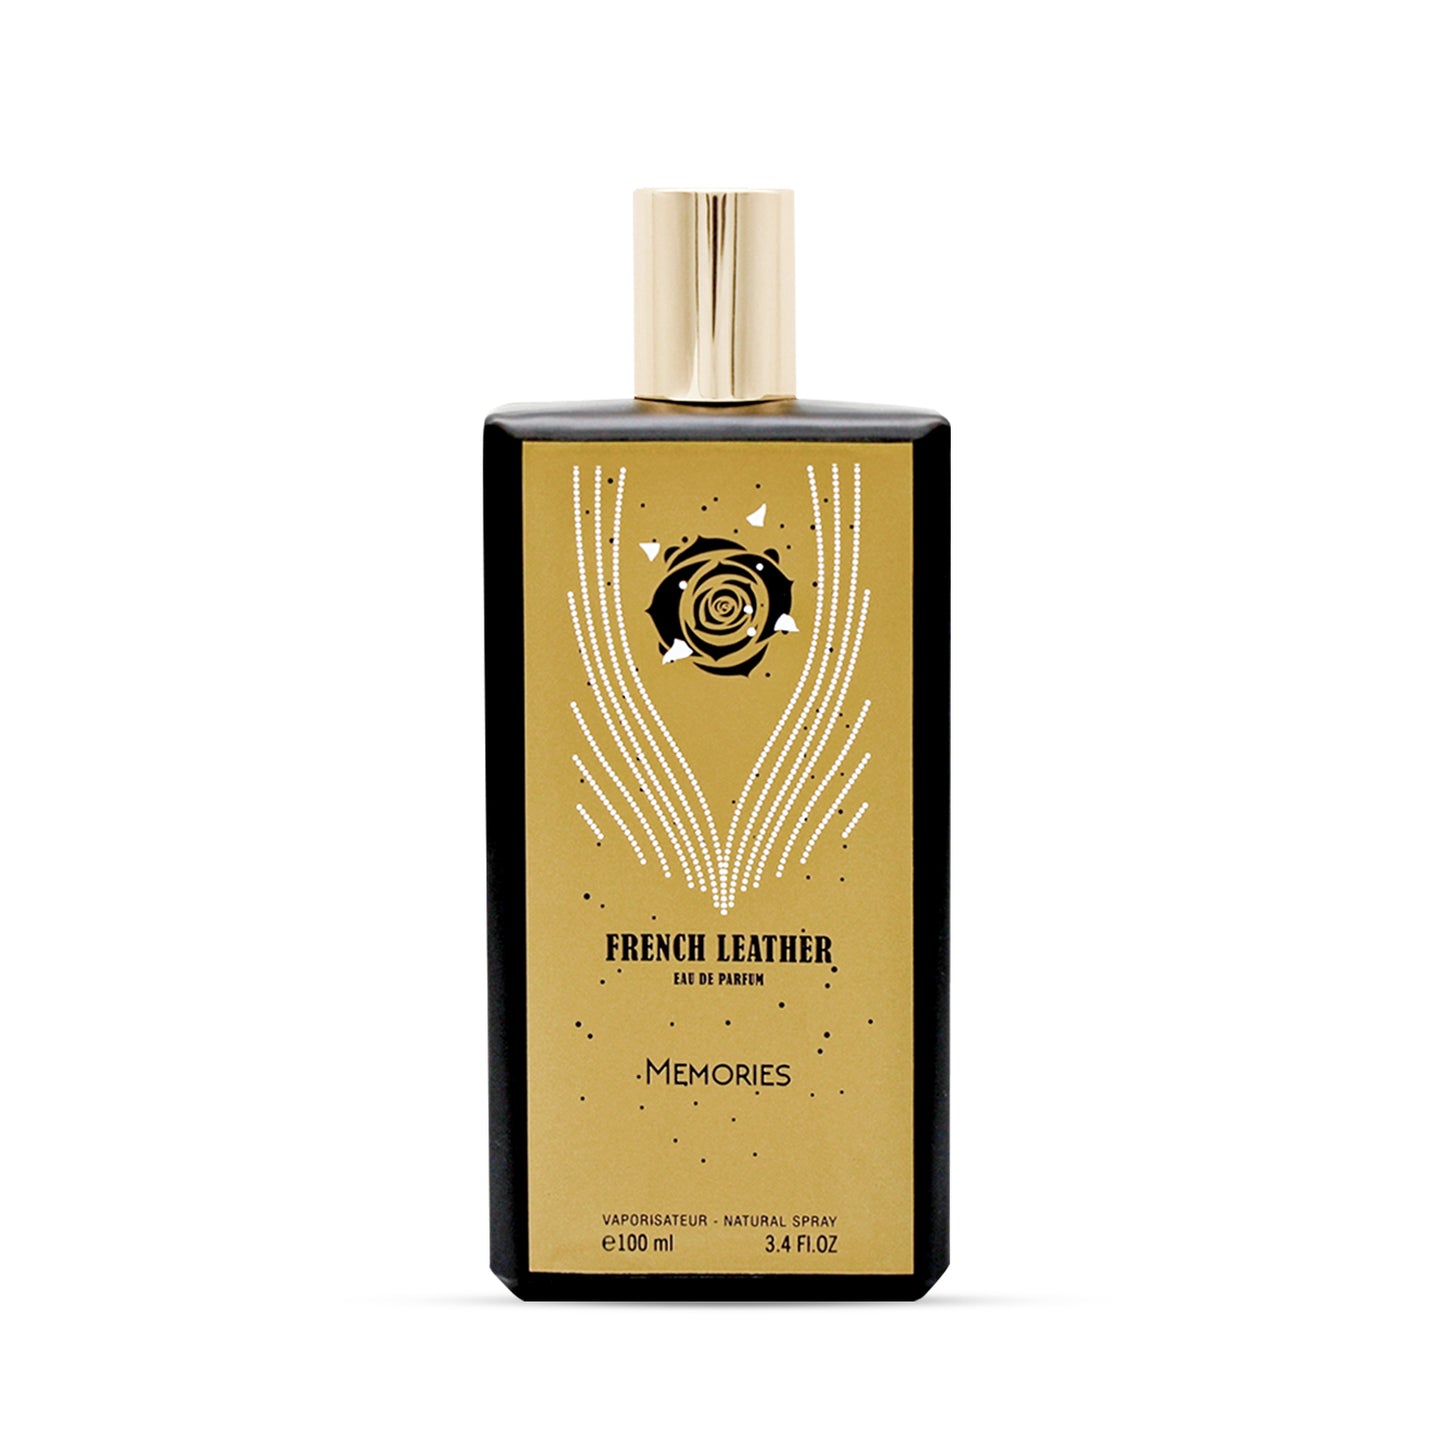 MEMORIES FRENCH LEATHER EDP 100ML